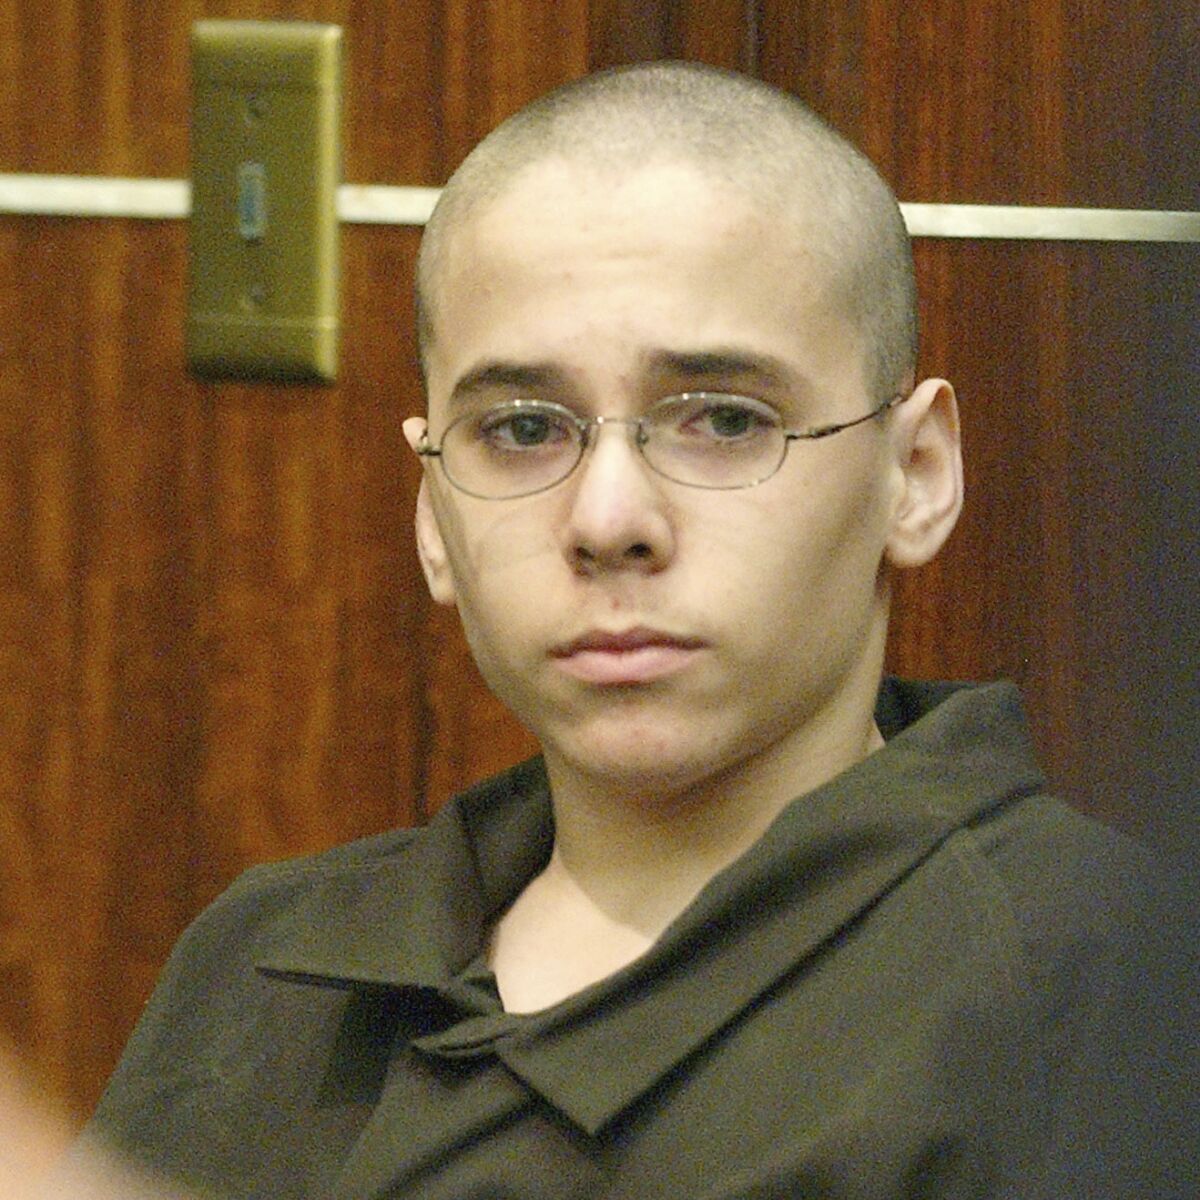 FILE - In this Monday, March 22, 2004 file photo, Michael Hernandez listens to his lawyer at the Miami-Dade County Courthouse in Miami. According to Florida Department of Corrections online records, Hernandez, who lured Jaime Gough into a bathroom stall at their suburban Miami middle school when he was 14, cut his throat and died in prison on Thursday, April 29, 2021. (AP Photo/Alan Diaz)